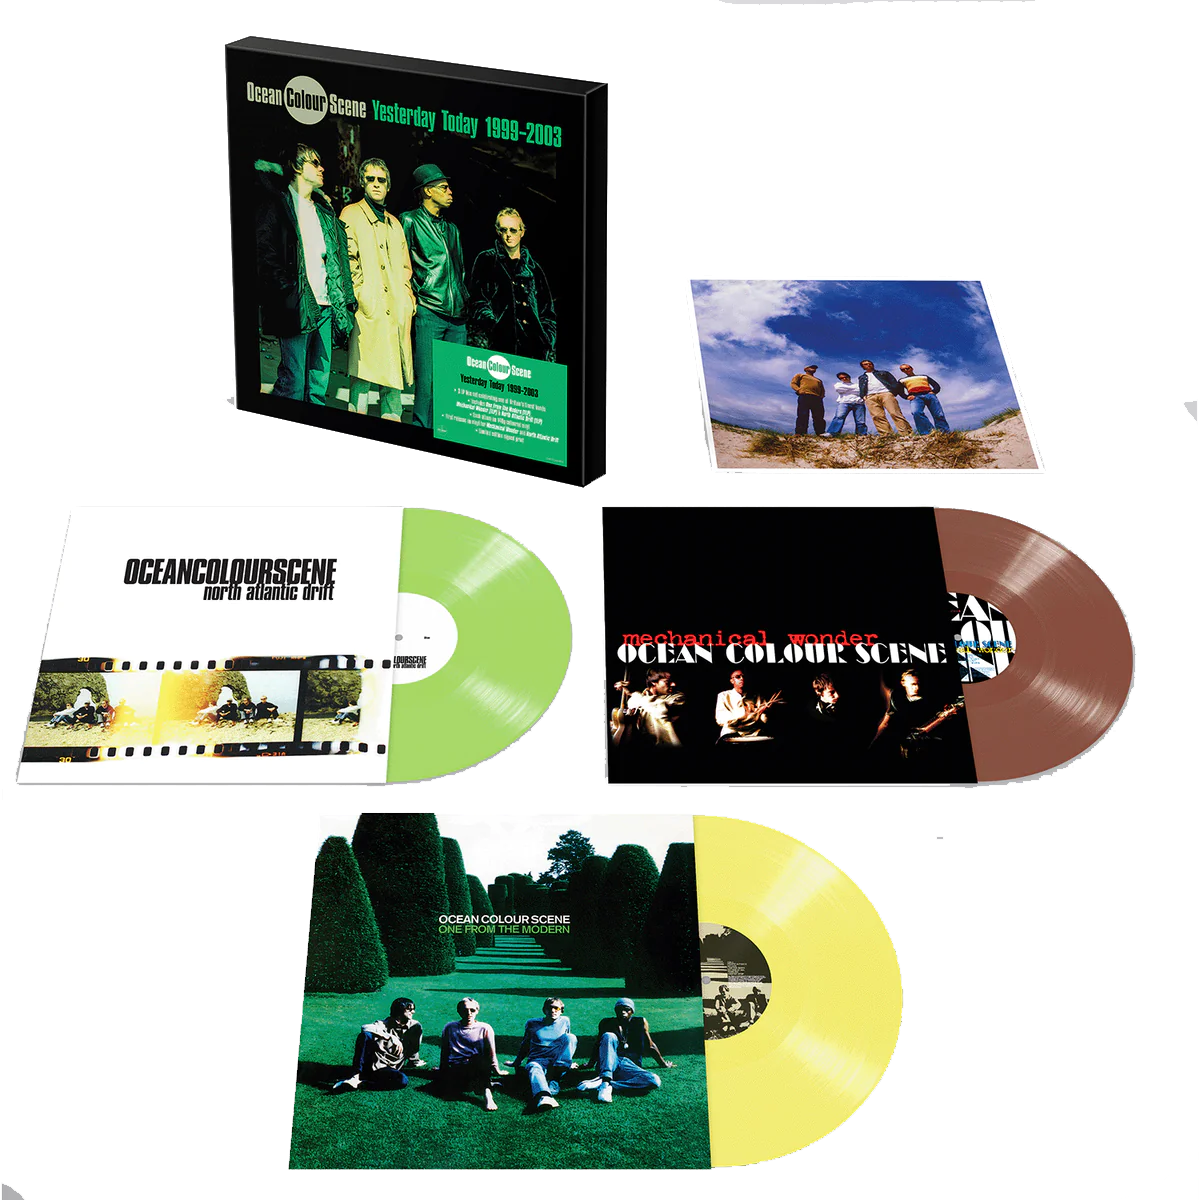 Yesterday Today 1999 – 2003: Colour Vinyl 3LP Box Set [Signed by Ocean Colour Scene]